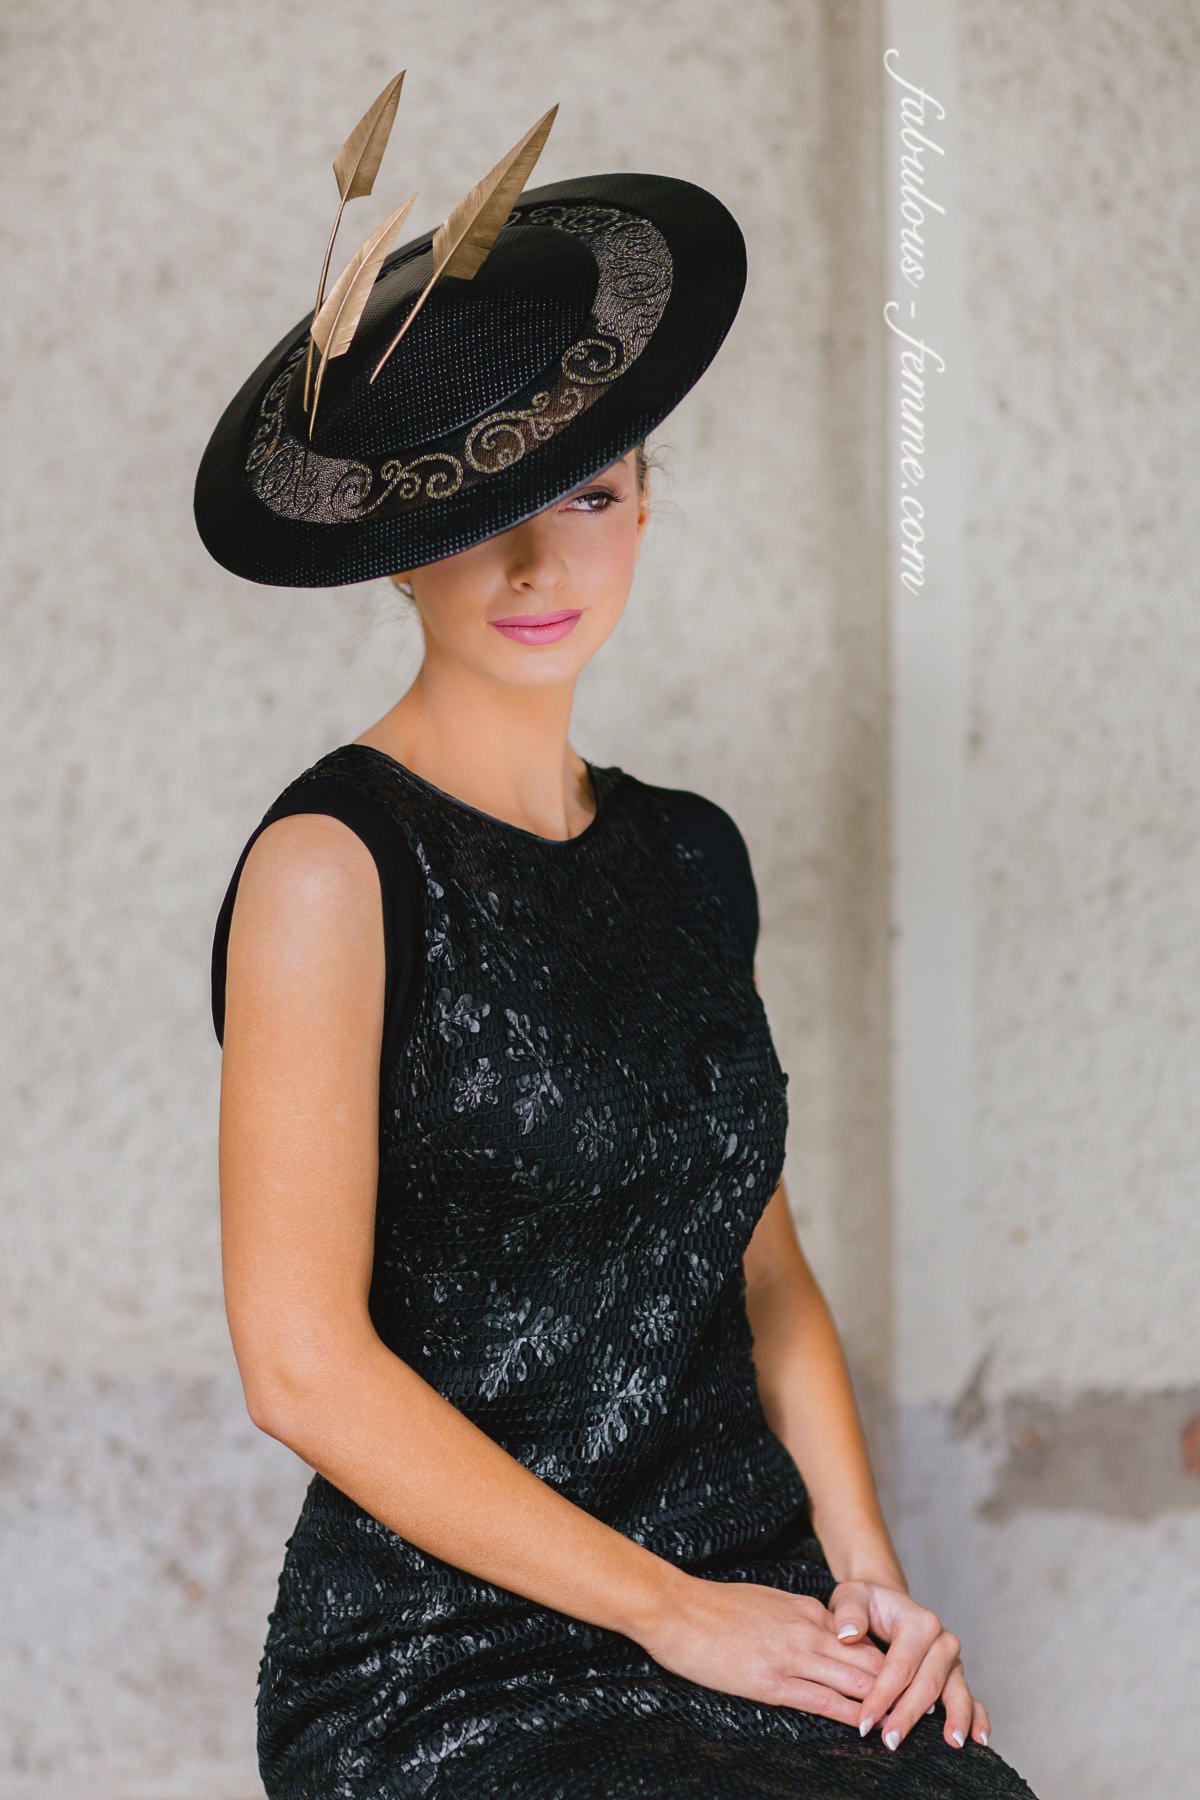 Derby Day - Hats with matching outfit in black and white - new trends